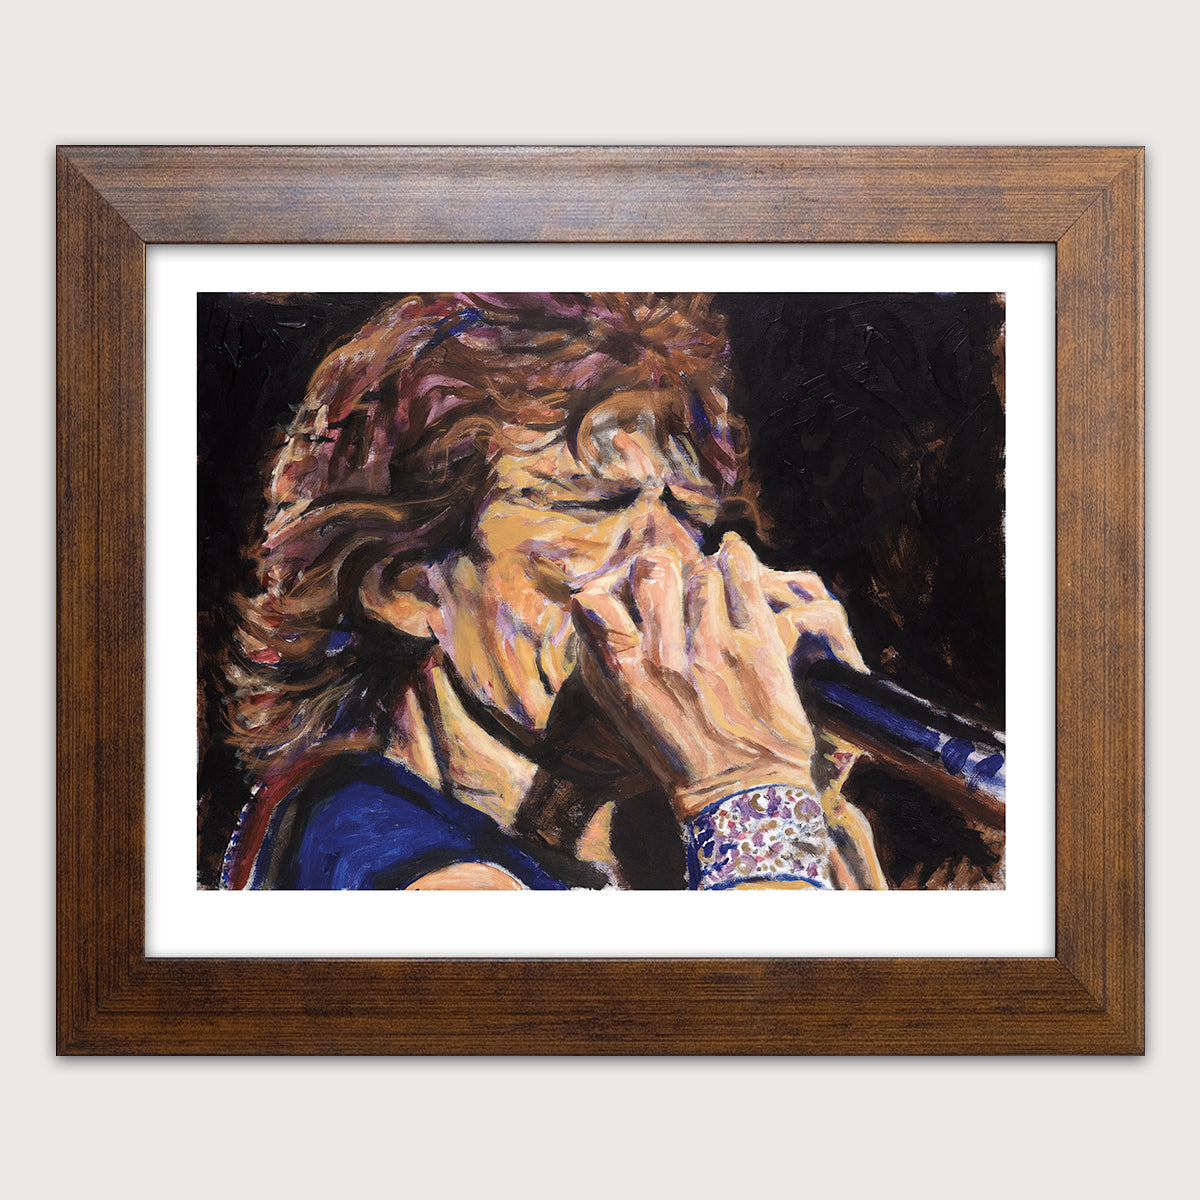 Ronnie Wood - Mick with Harmonica - Collectors Series